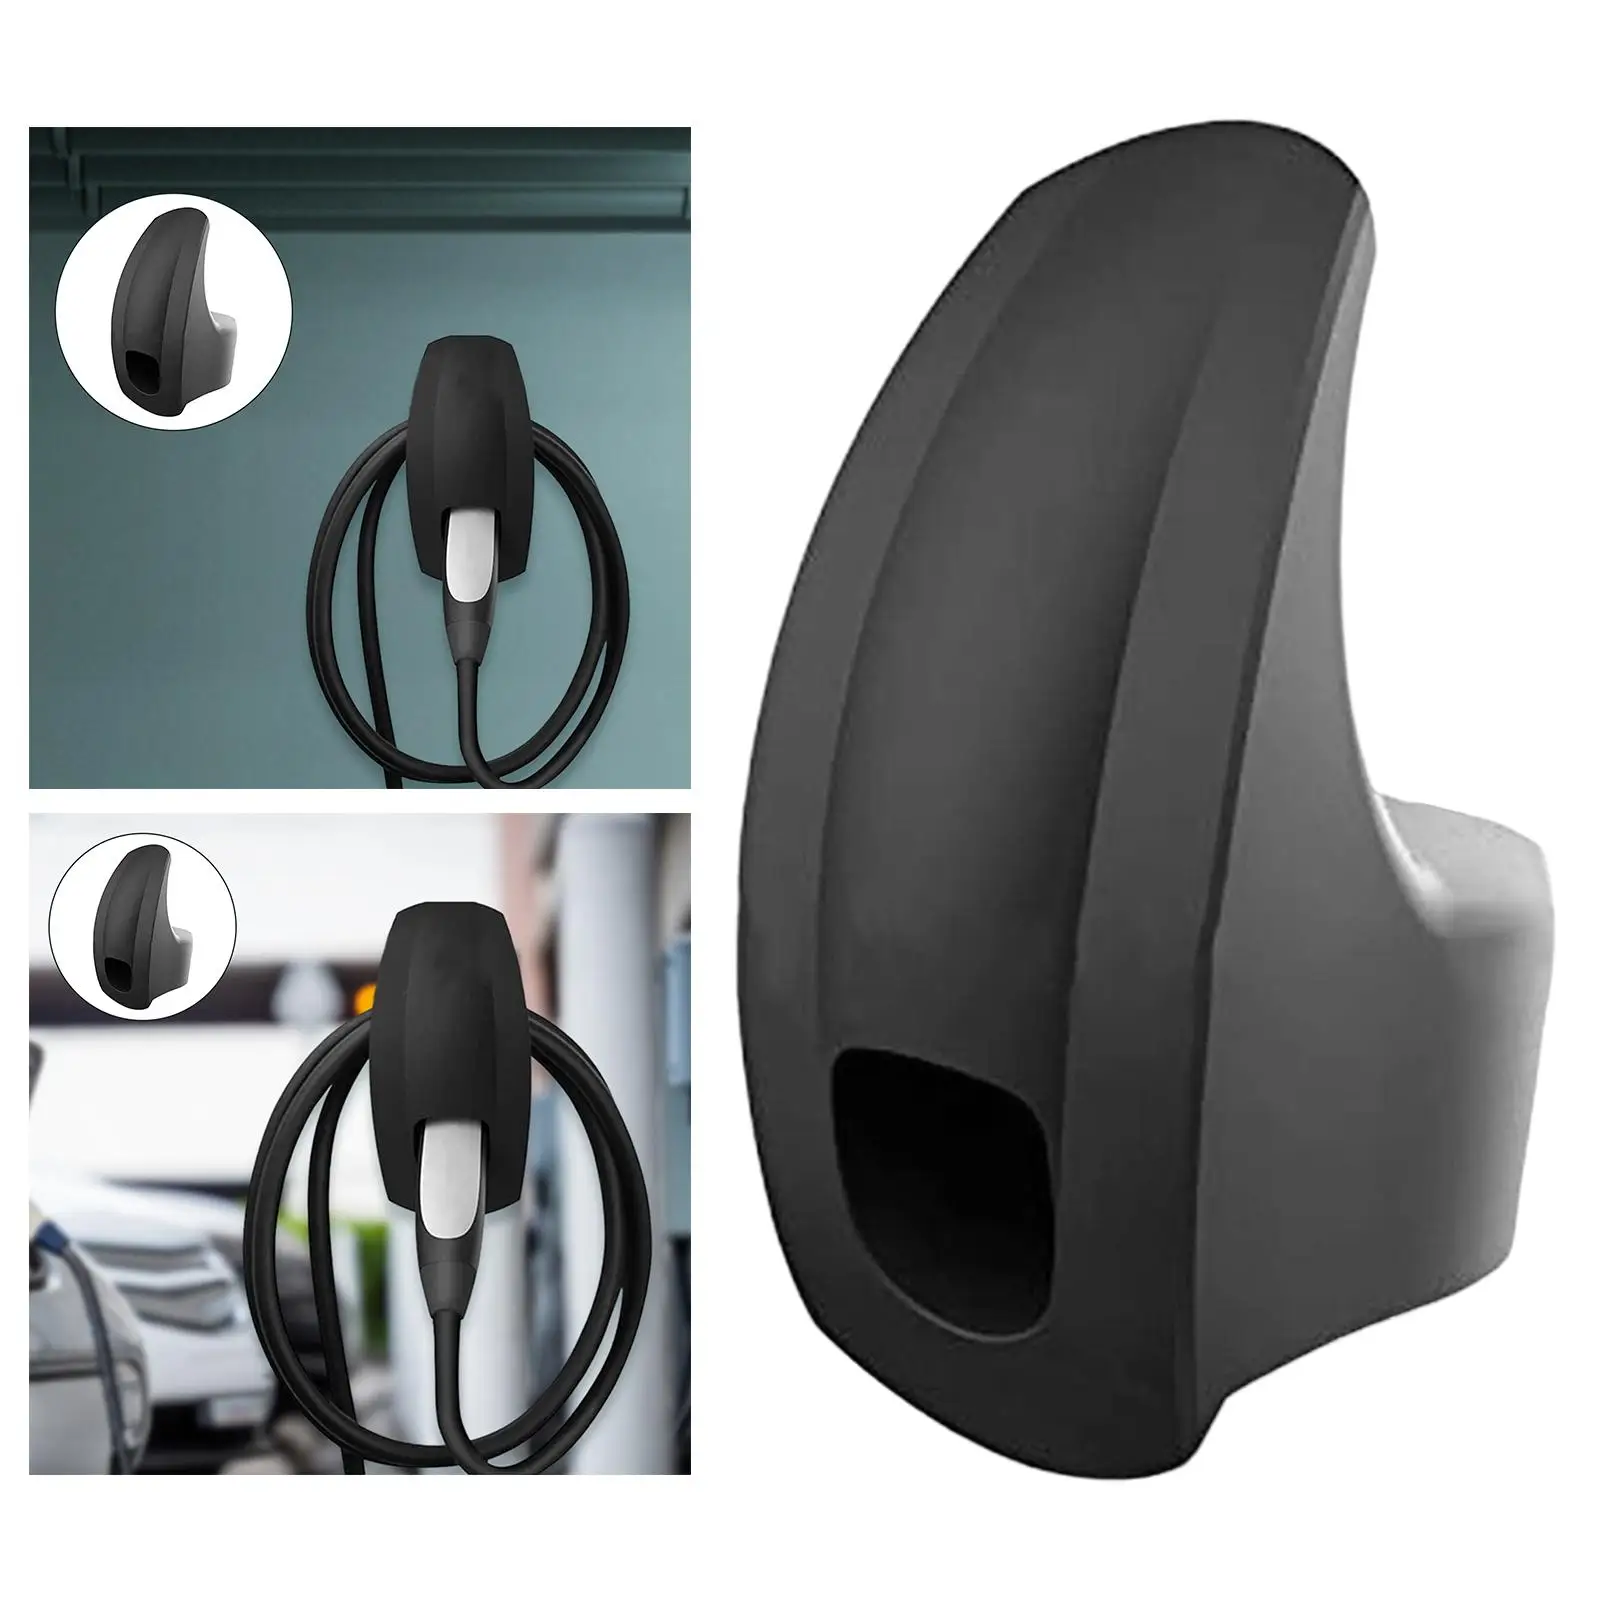 Charger Wall Holder Mount Cord Holder Portable for Tesla Model 3 S x Y